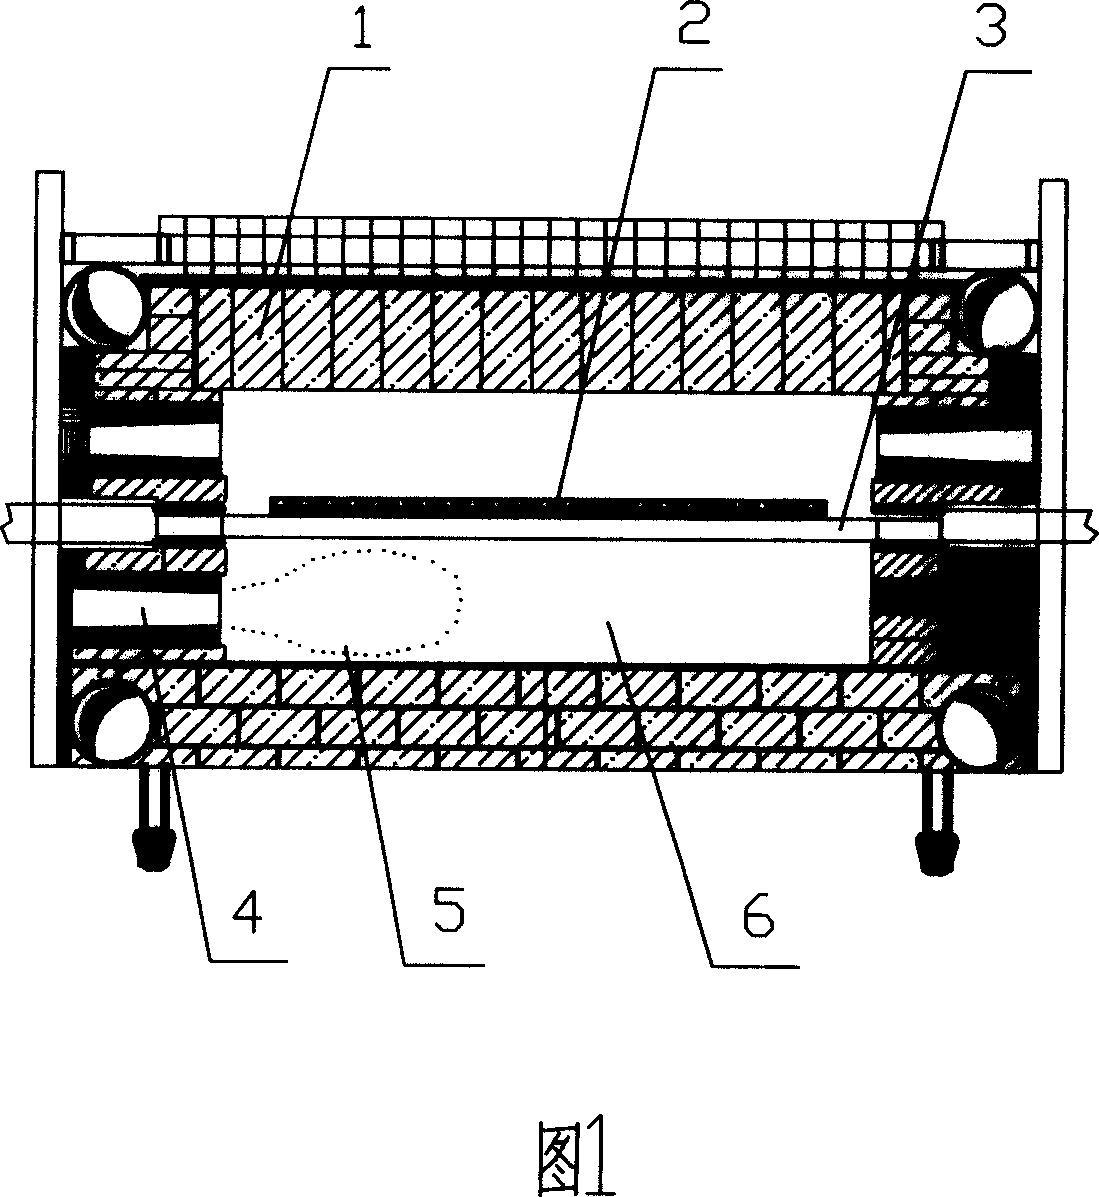 Method for solving section temperature difference of broad kiln